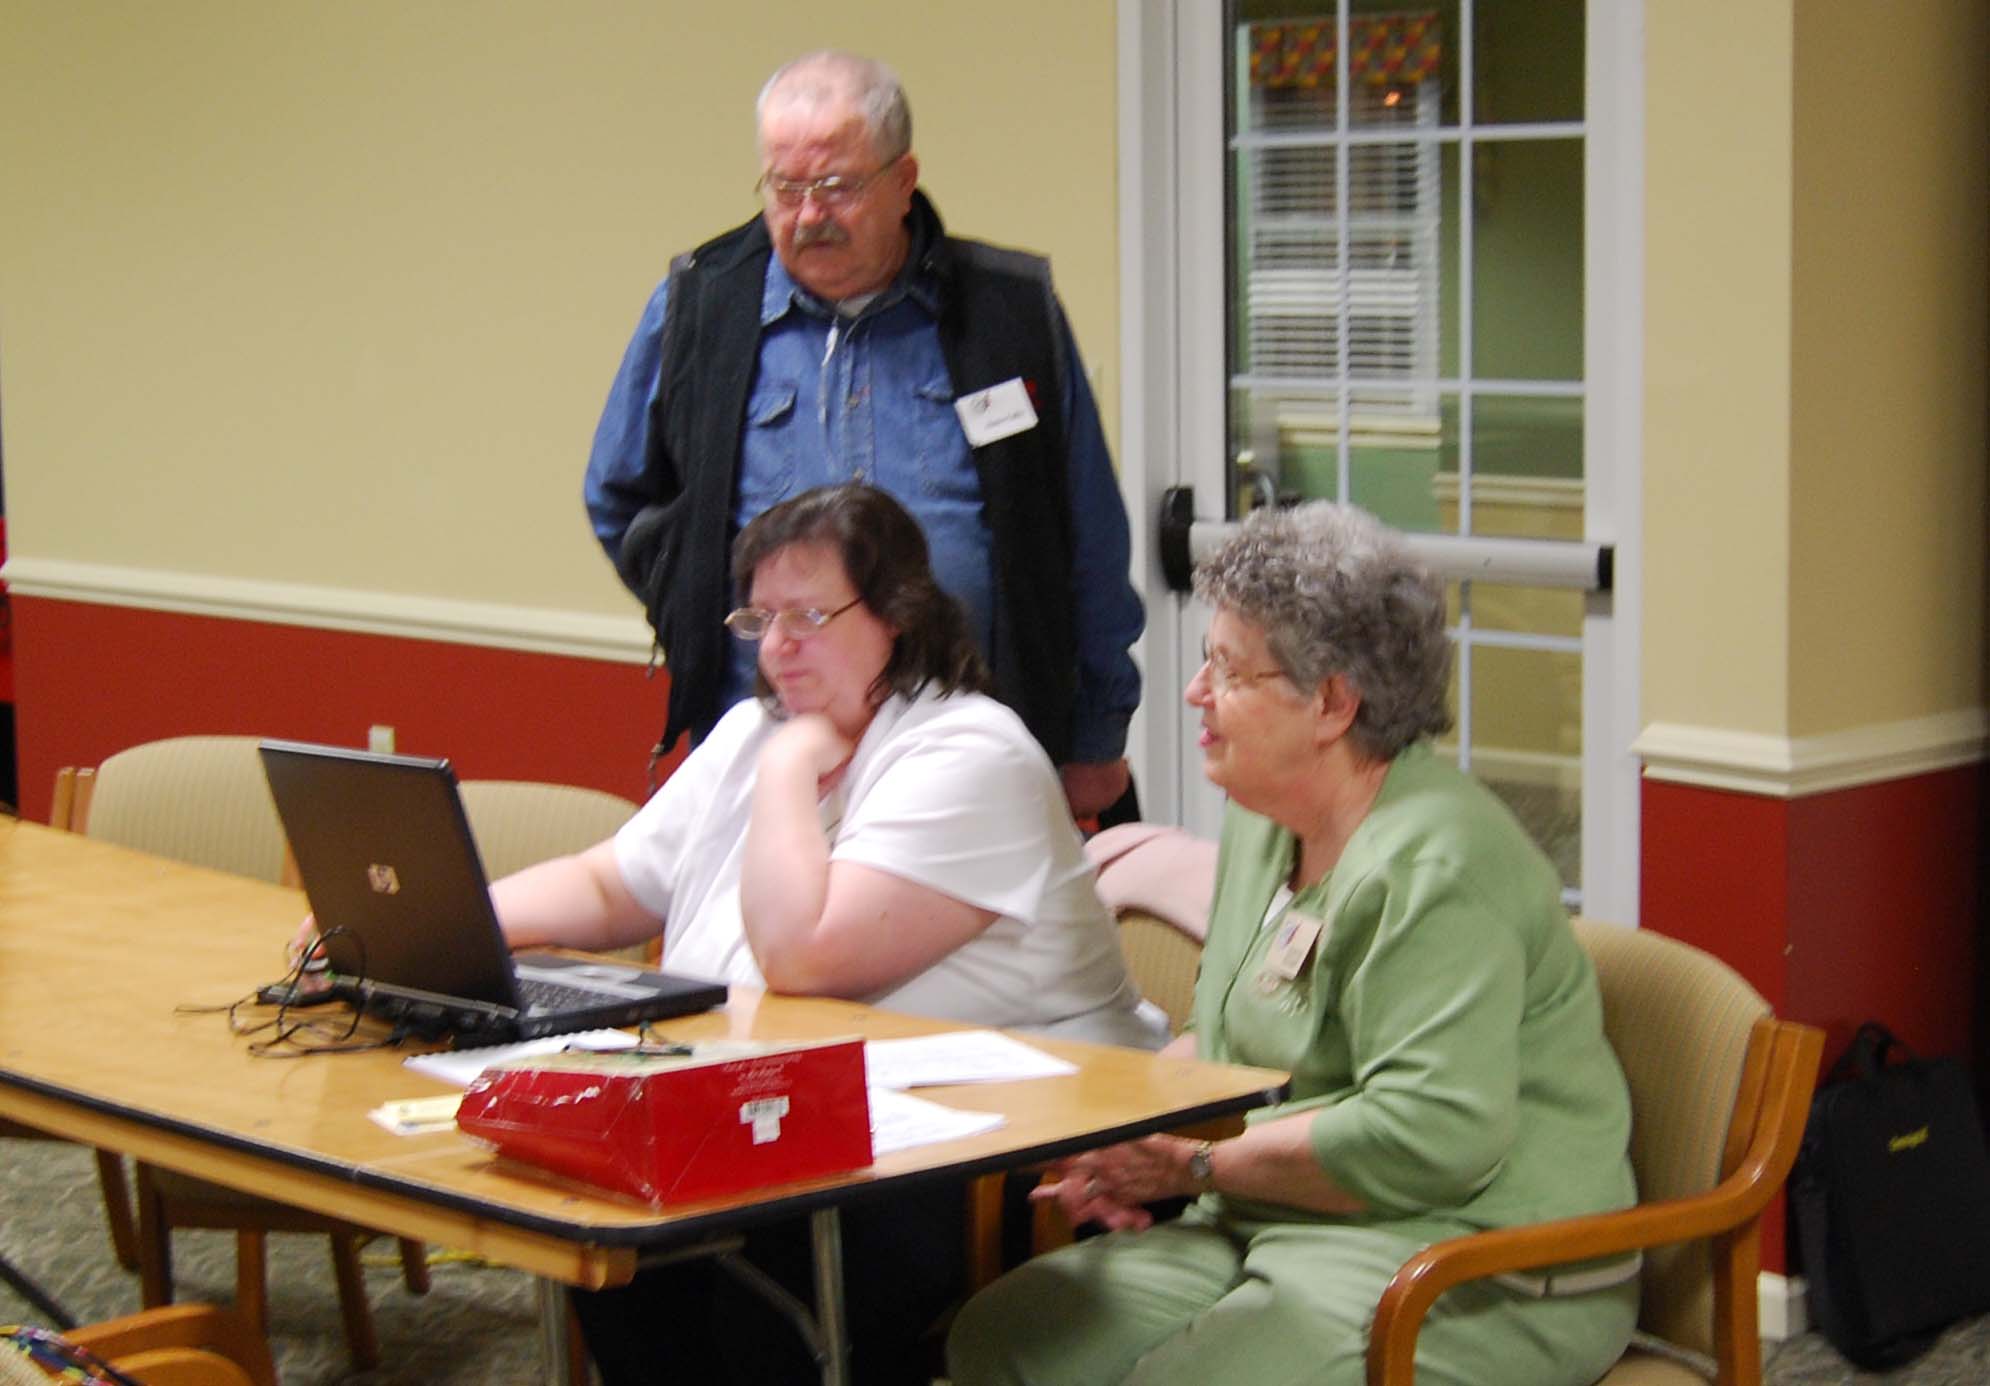 Members assist each other with learning new ways of searching for ancestors through the internet